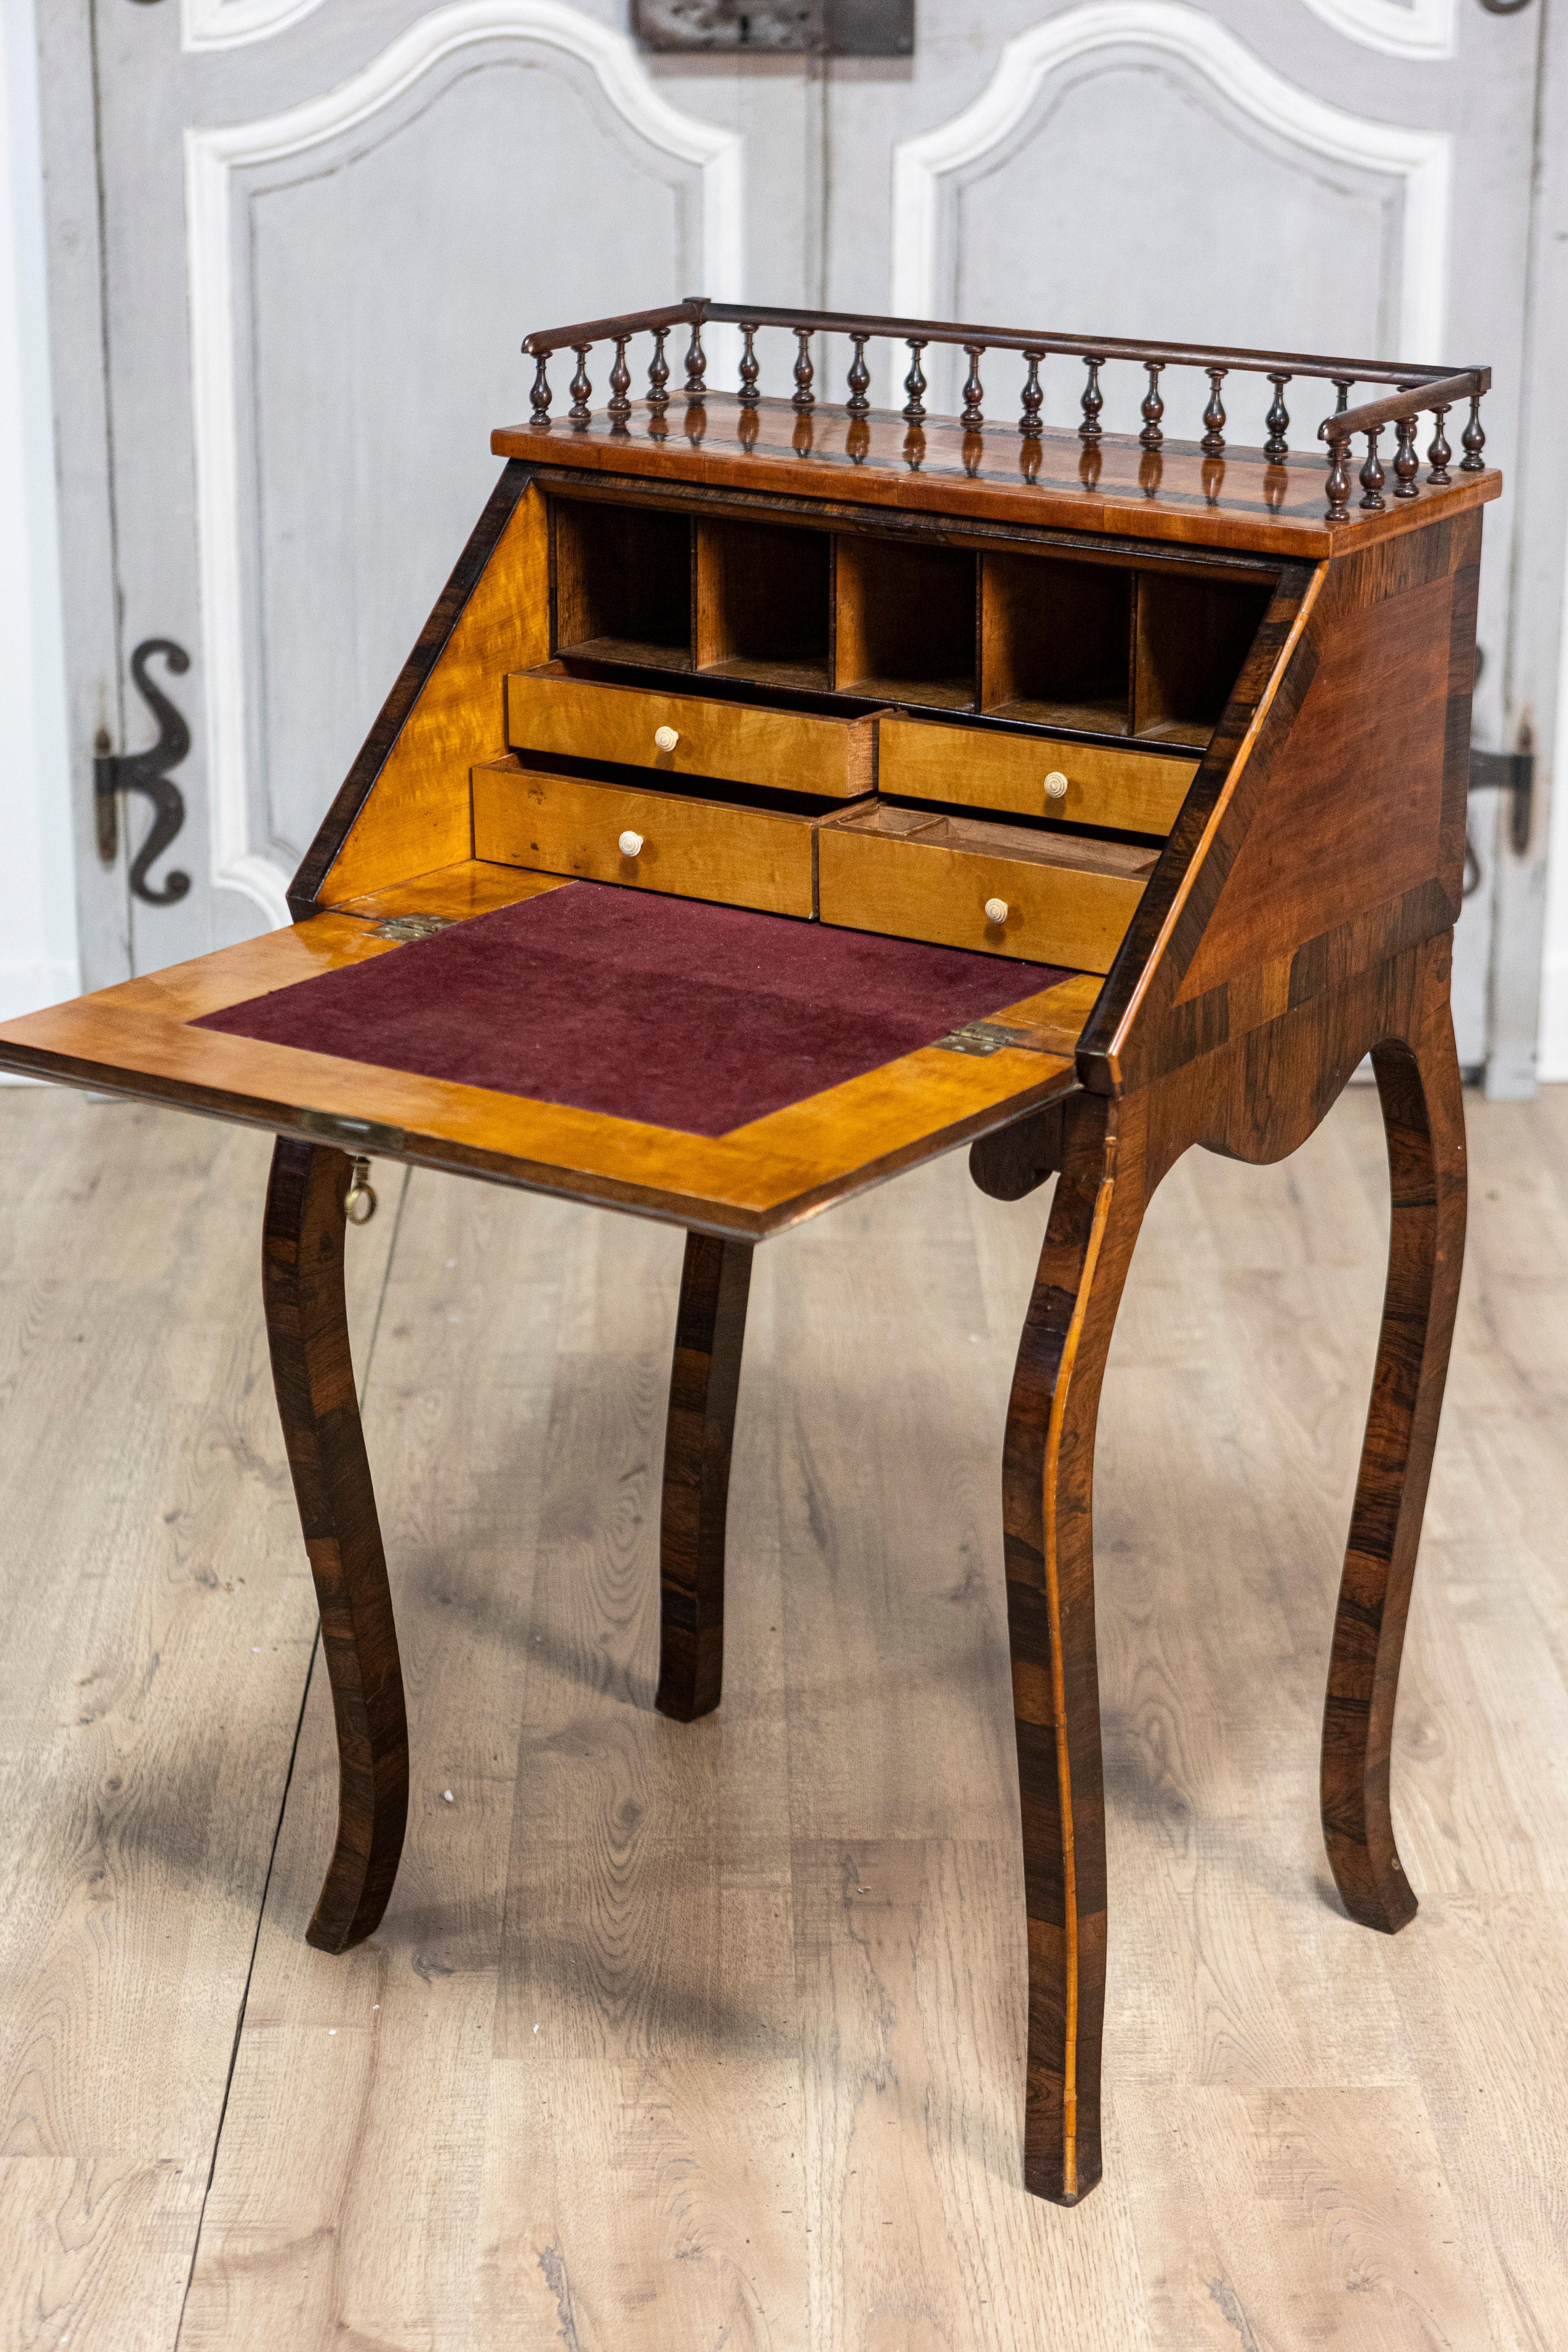 Italian 19th Century Walnut and Mahogany Writing Table with Slant Front Desk For Sale 2